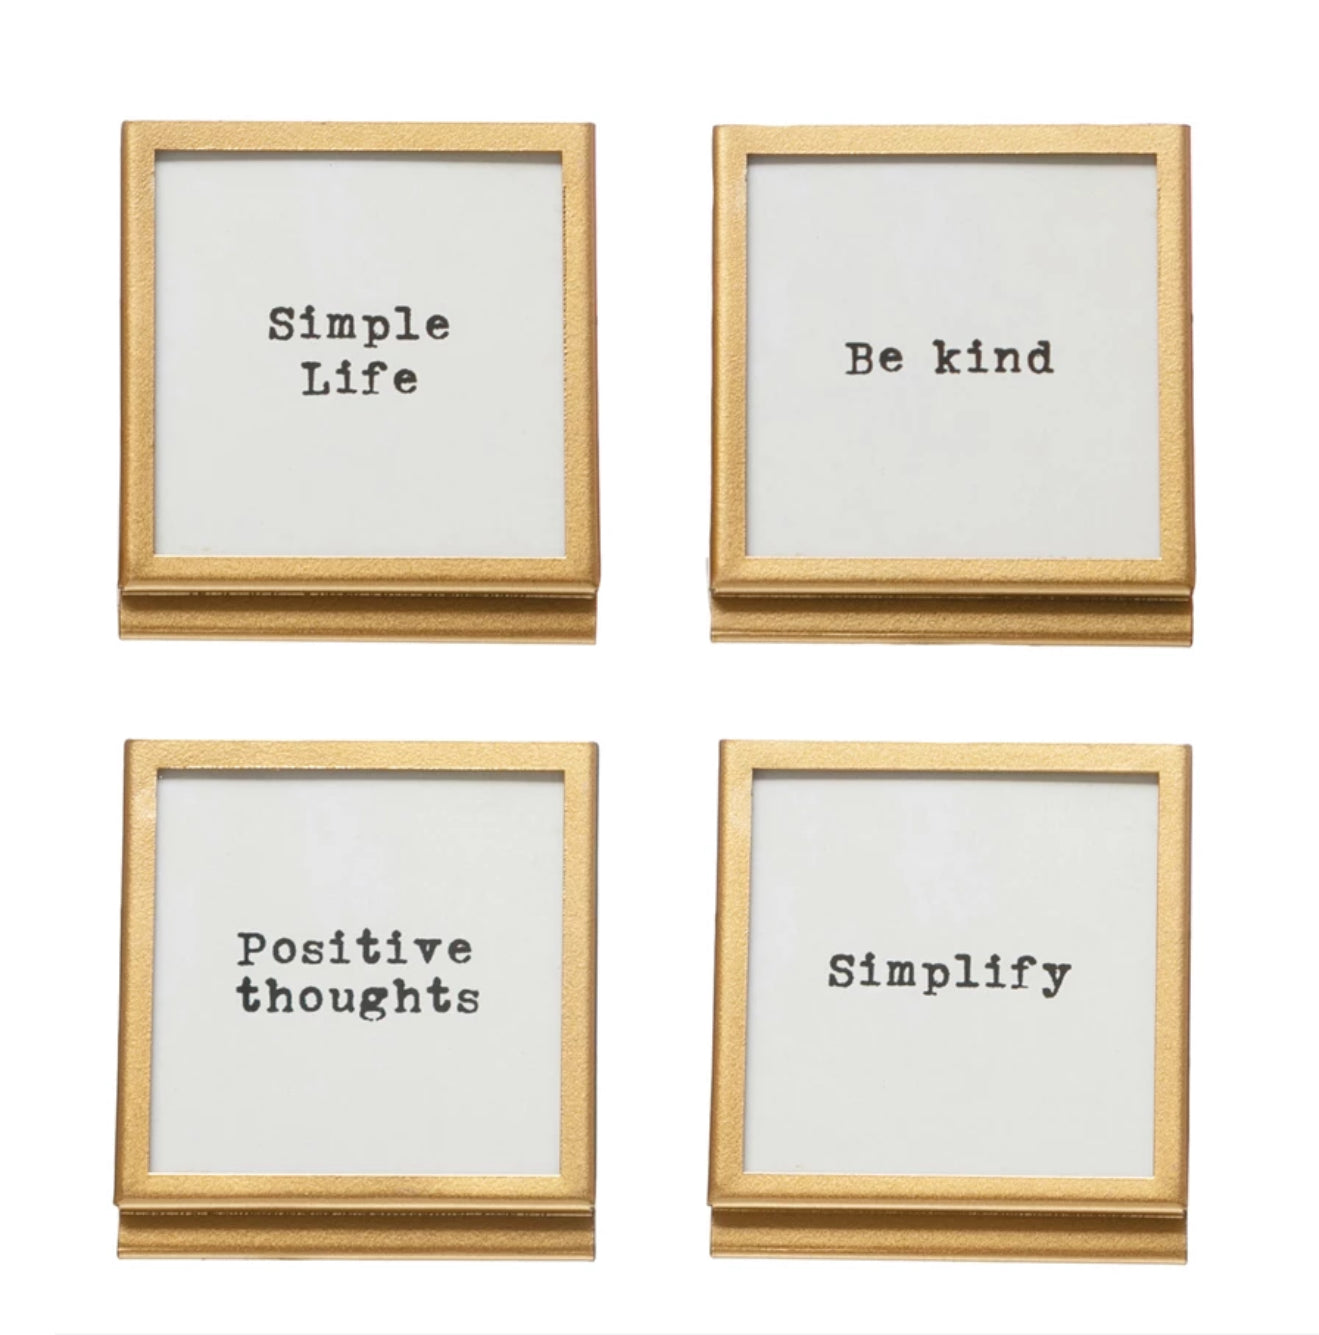 Frame with Uplifting Saying - “Positive Thoughts”